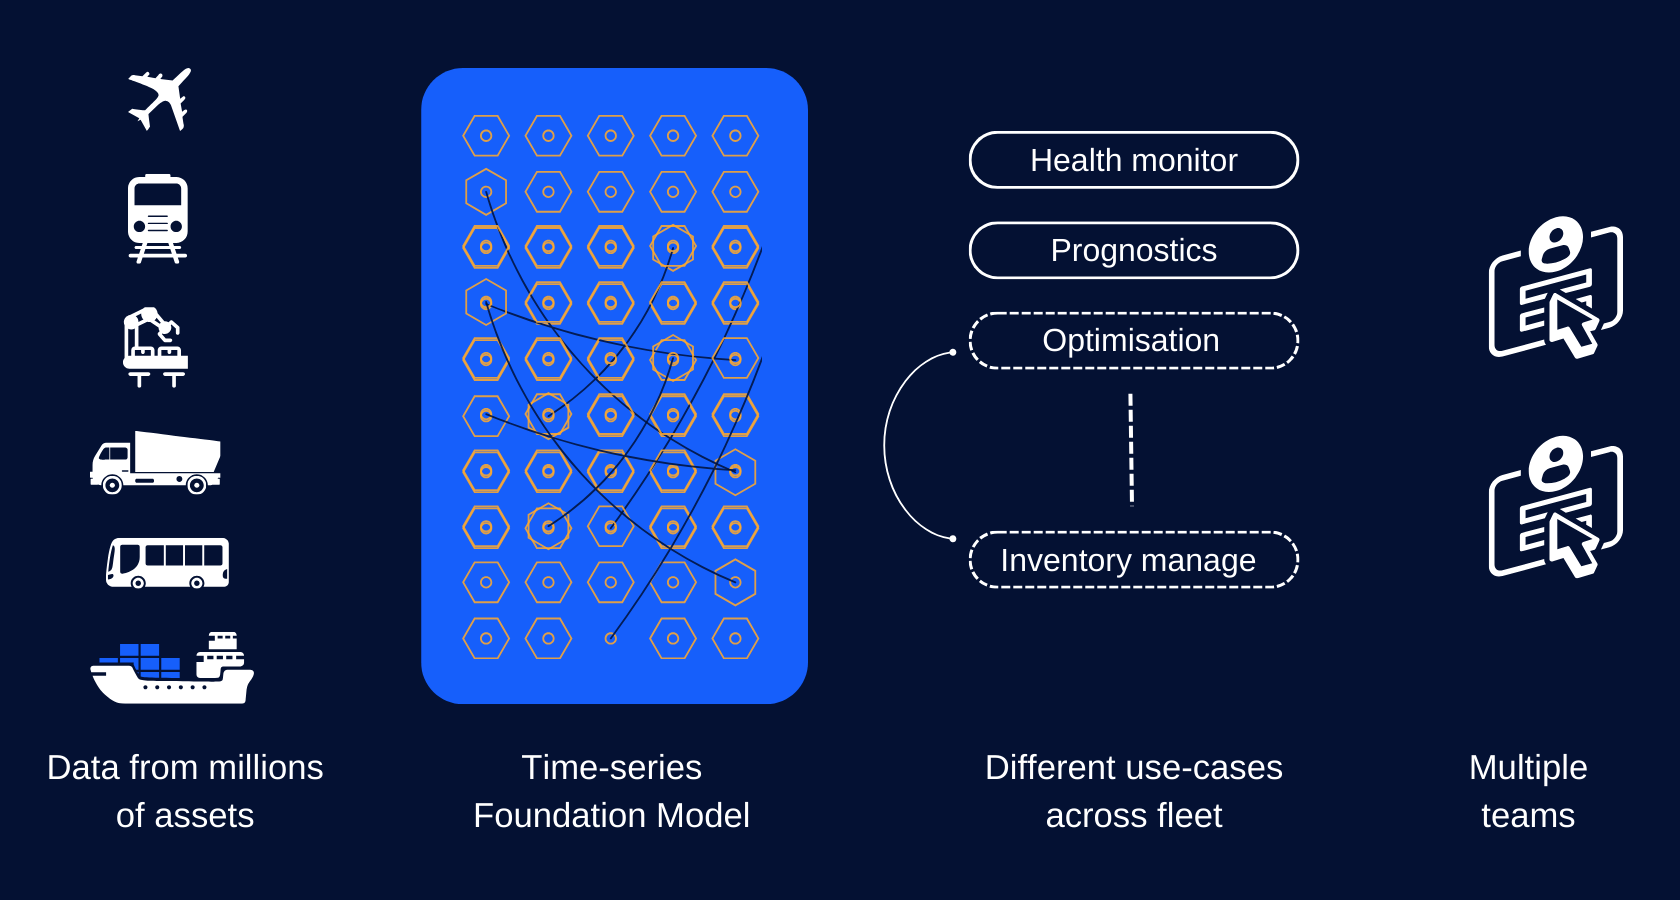 Foundation Model for time-series data